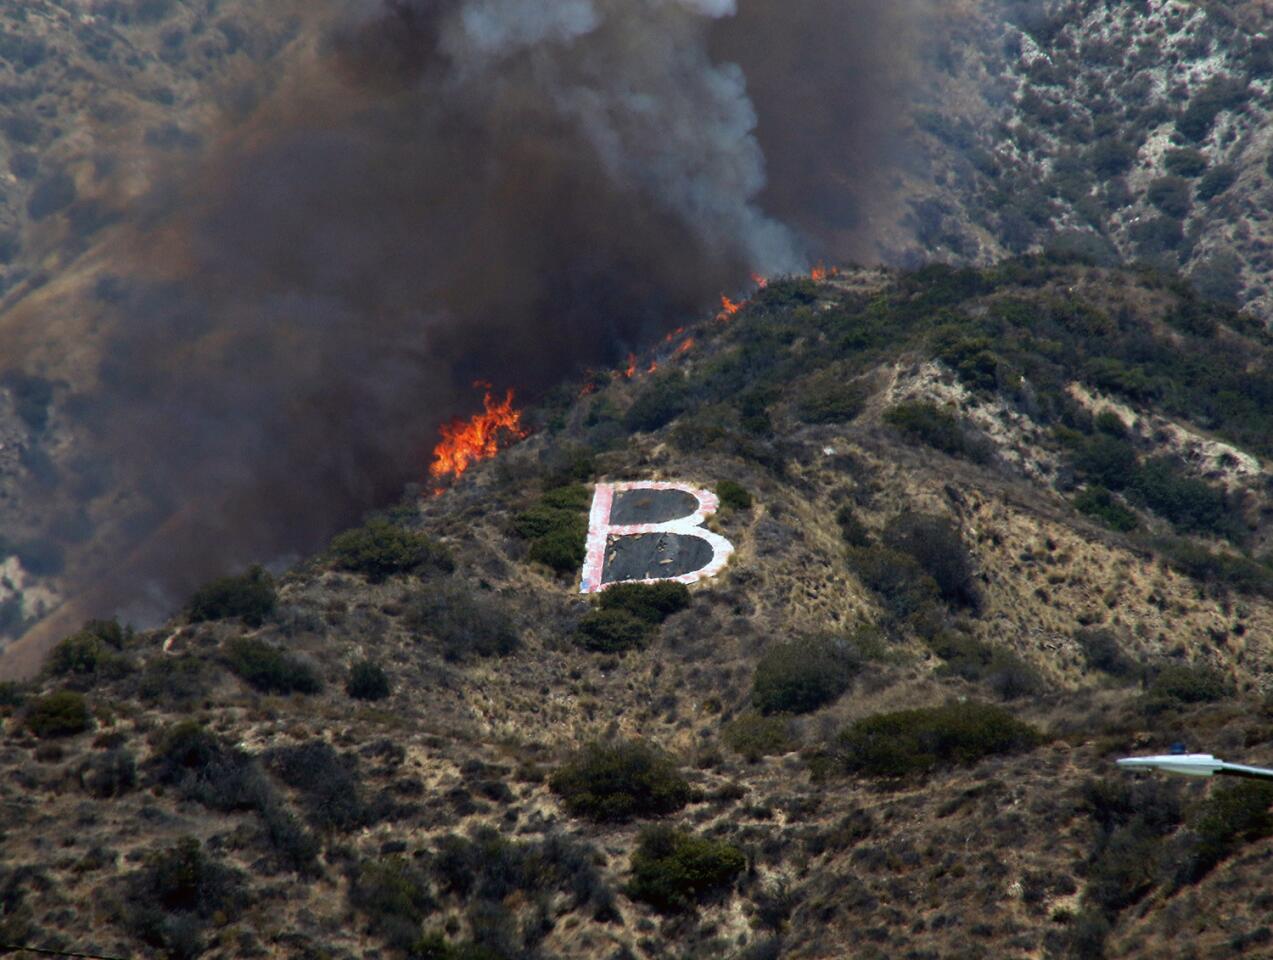 Burbank firefighters fought a three-alarm brush fire above Wildwood Canyon Park on Saturday.